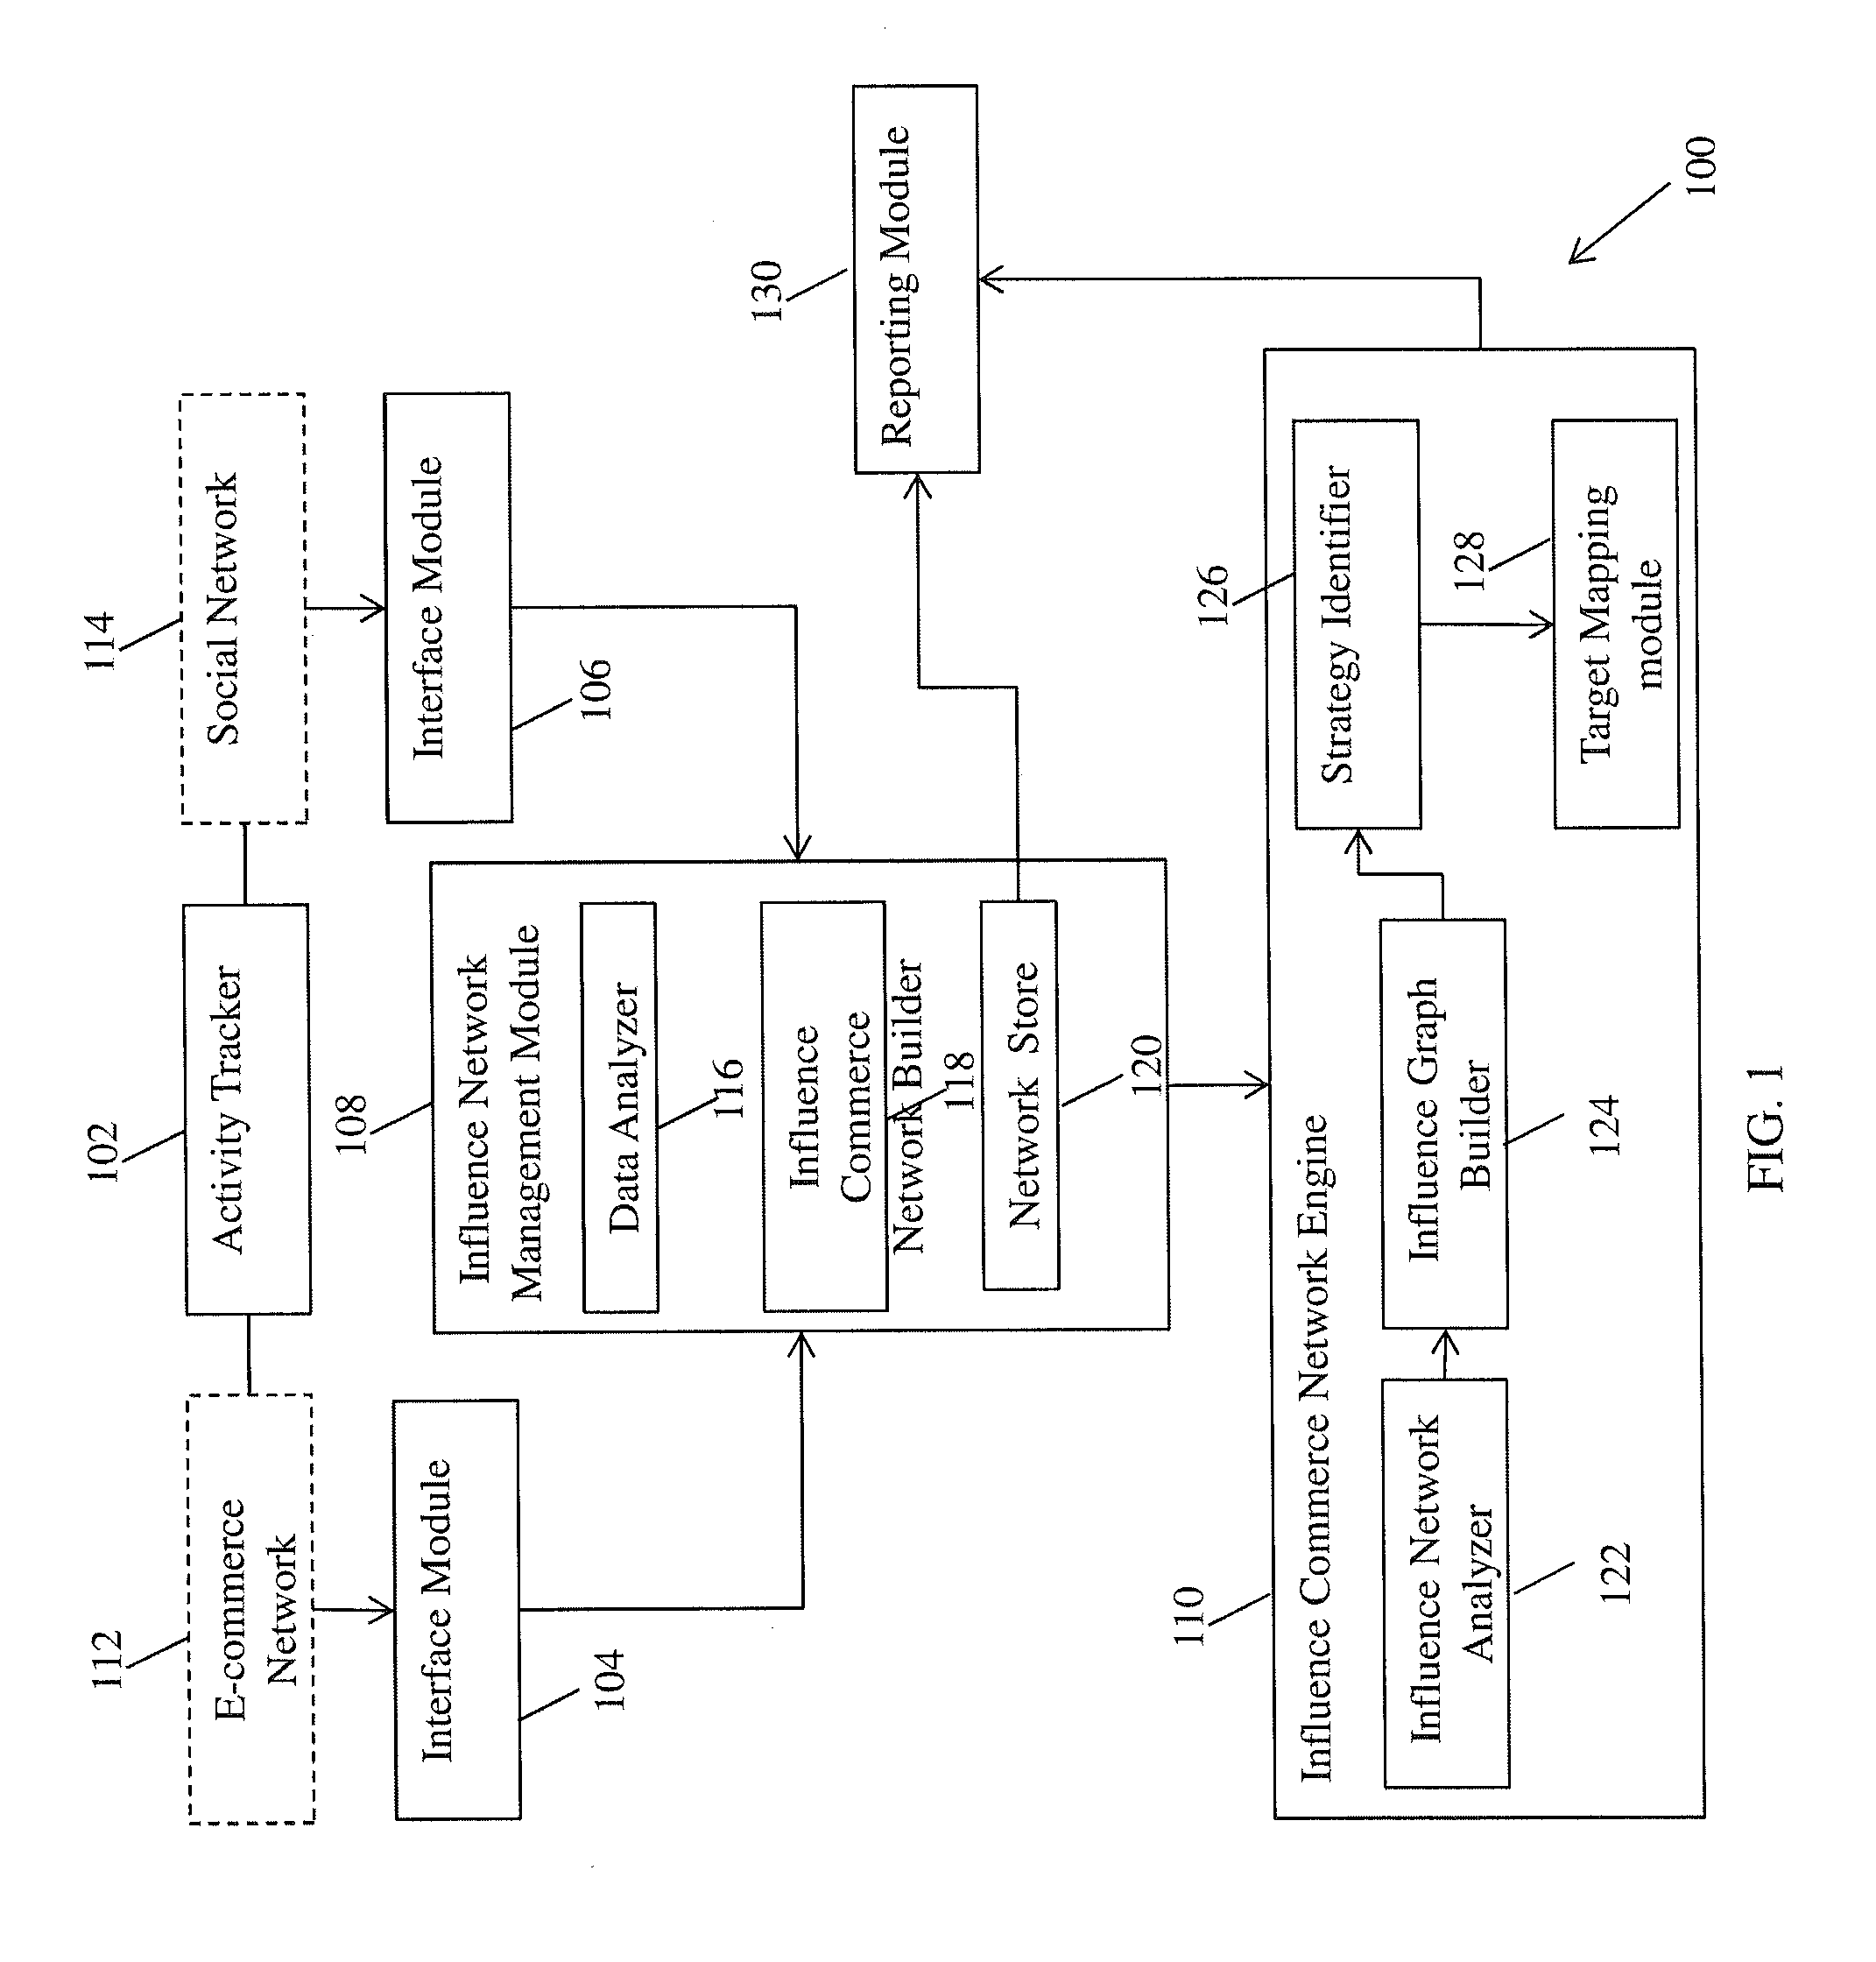 Method and system for building an influence commerce network and use thereof